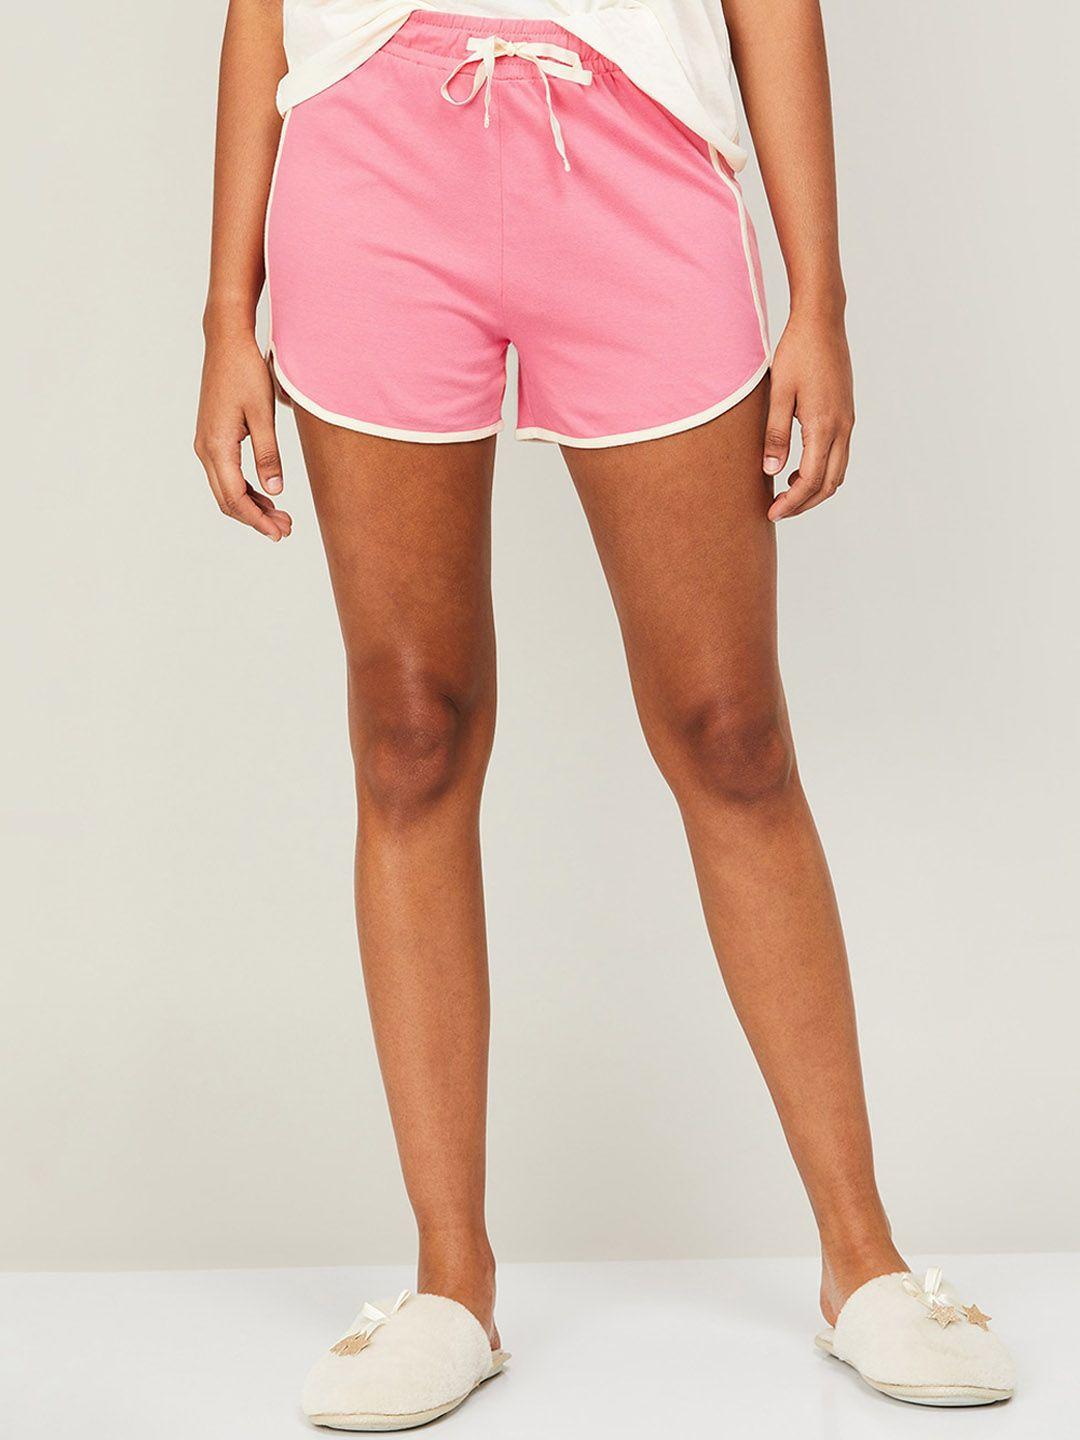 ginger-by-lifestyle-women-high-rise-above-knee-length-cotton-shorts